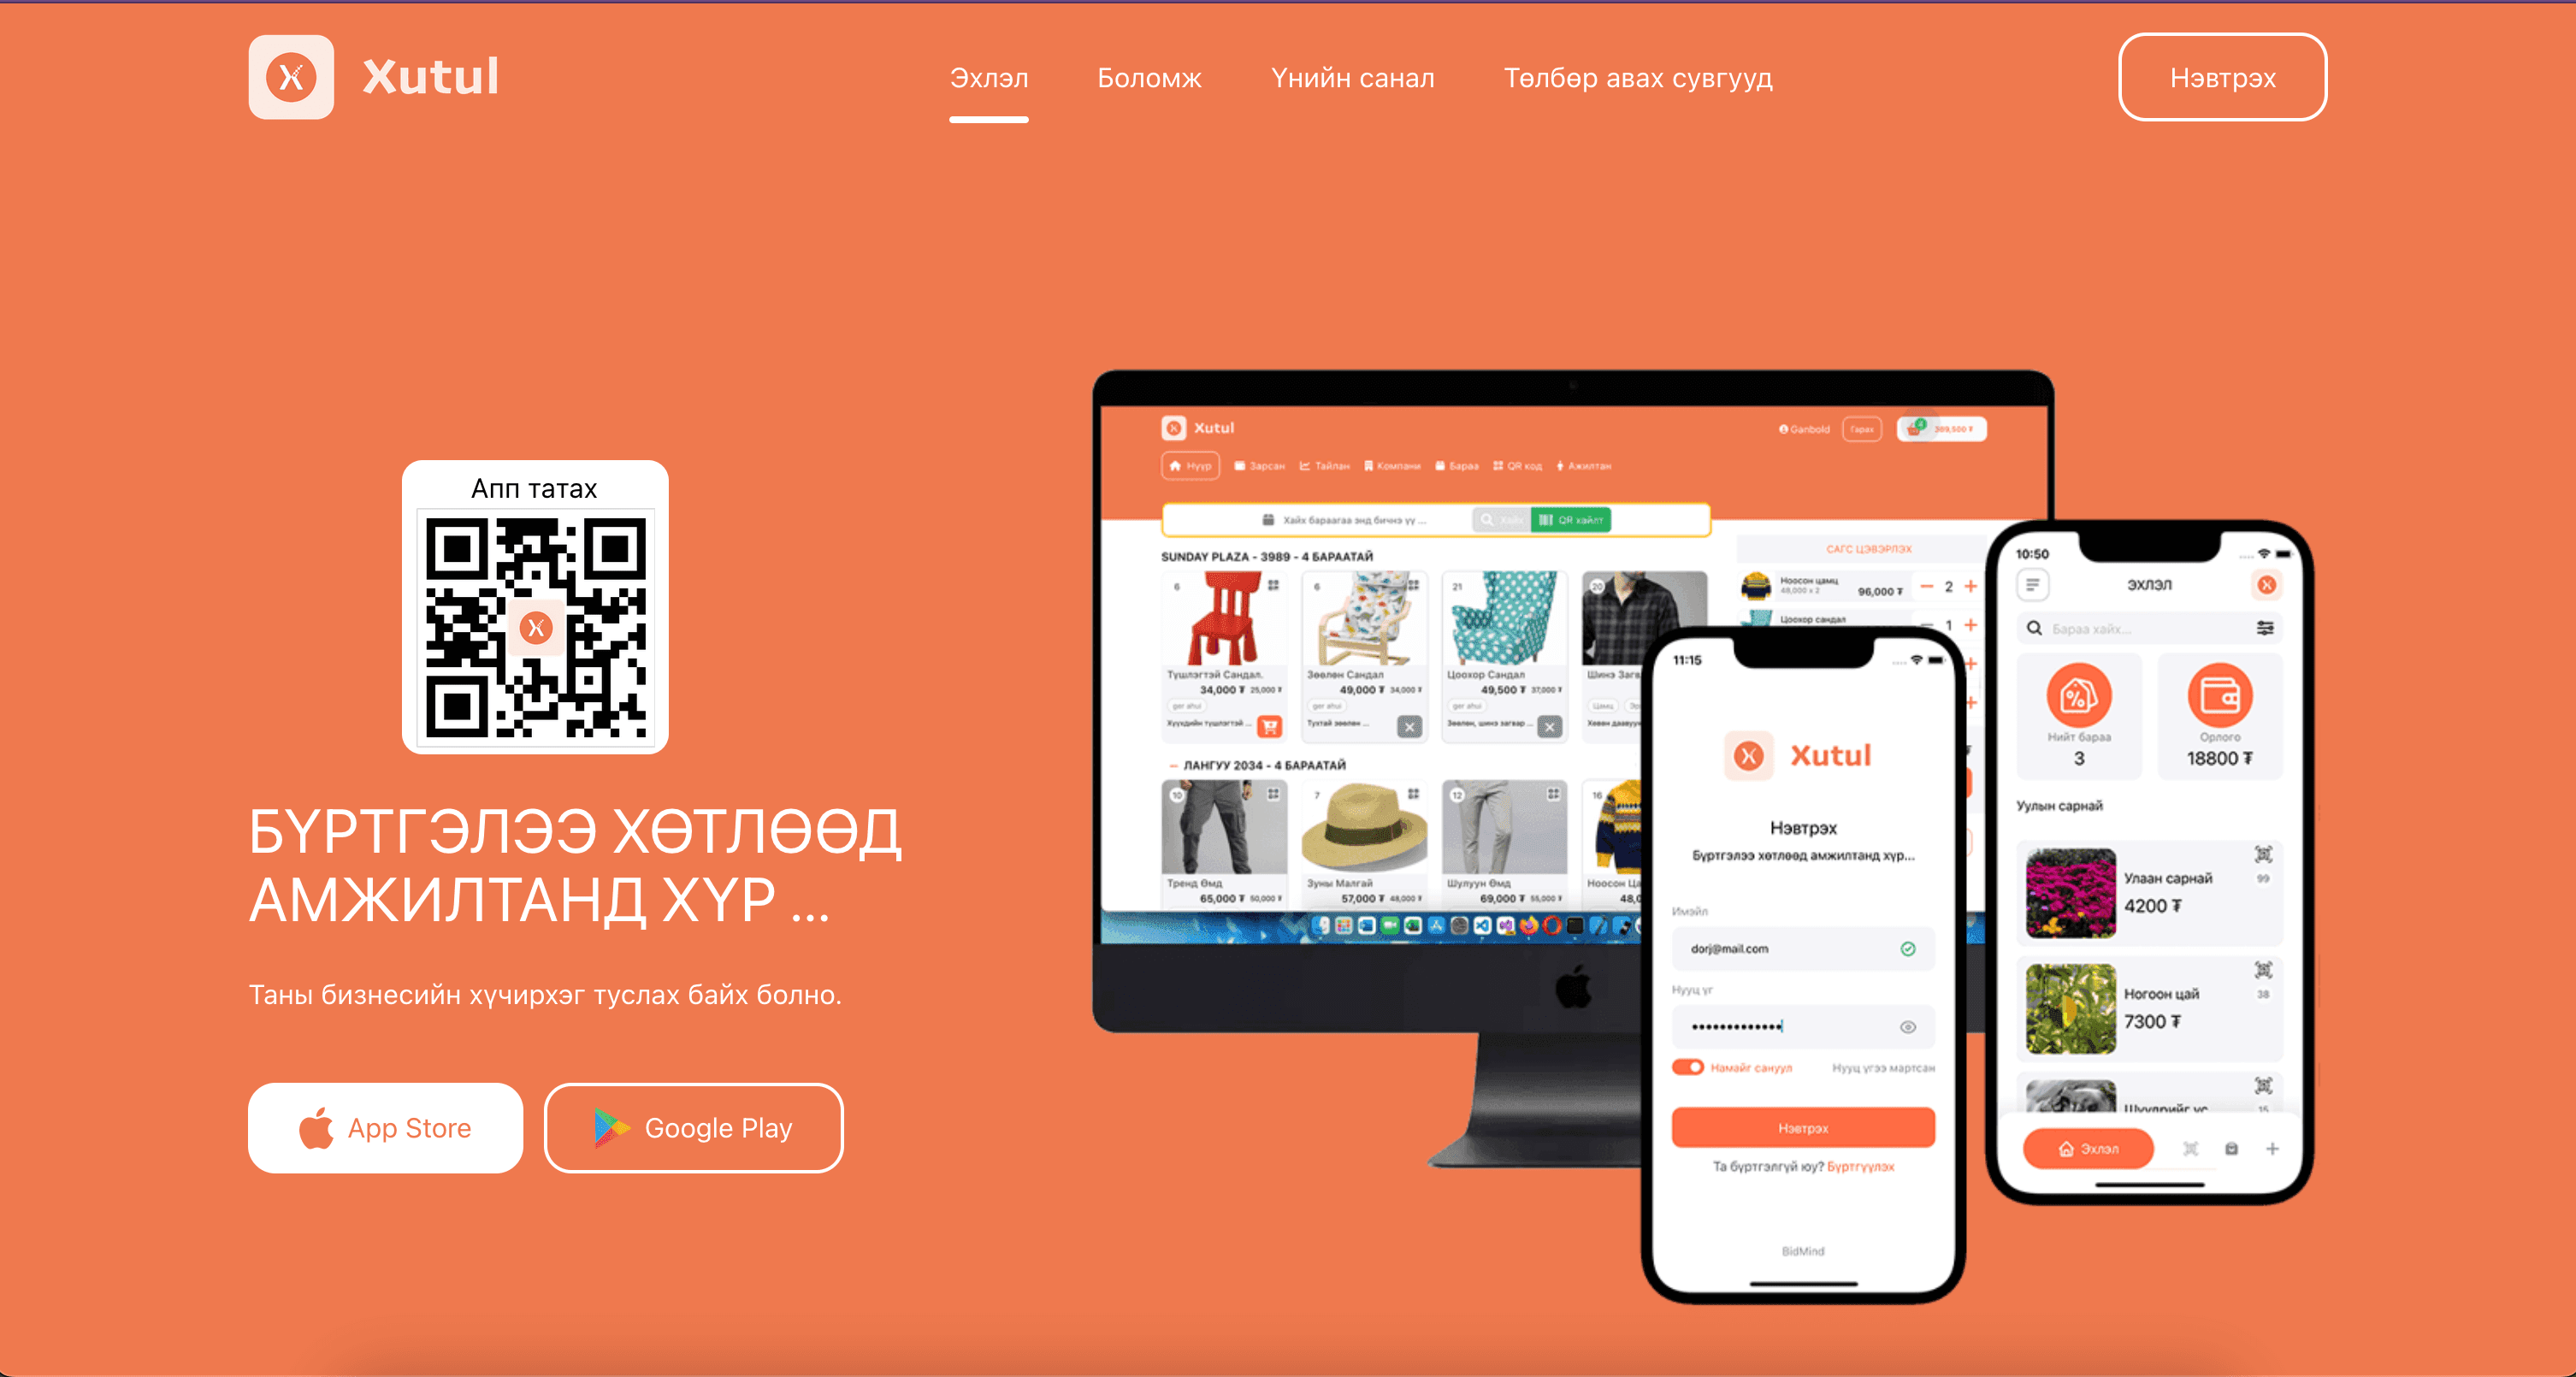 The landing page of the xutul project